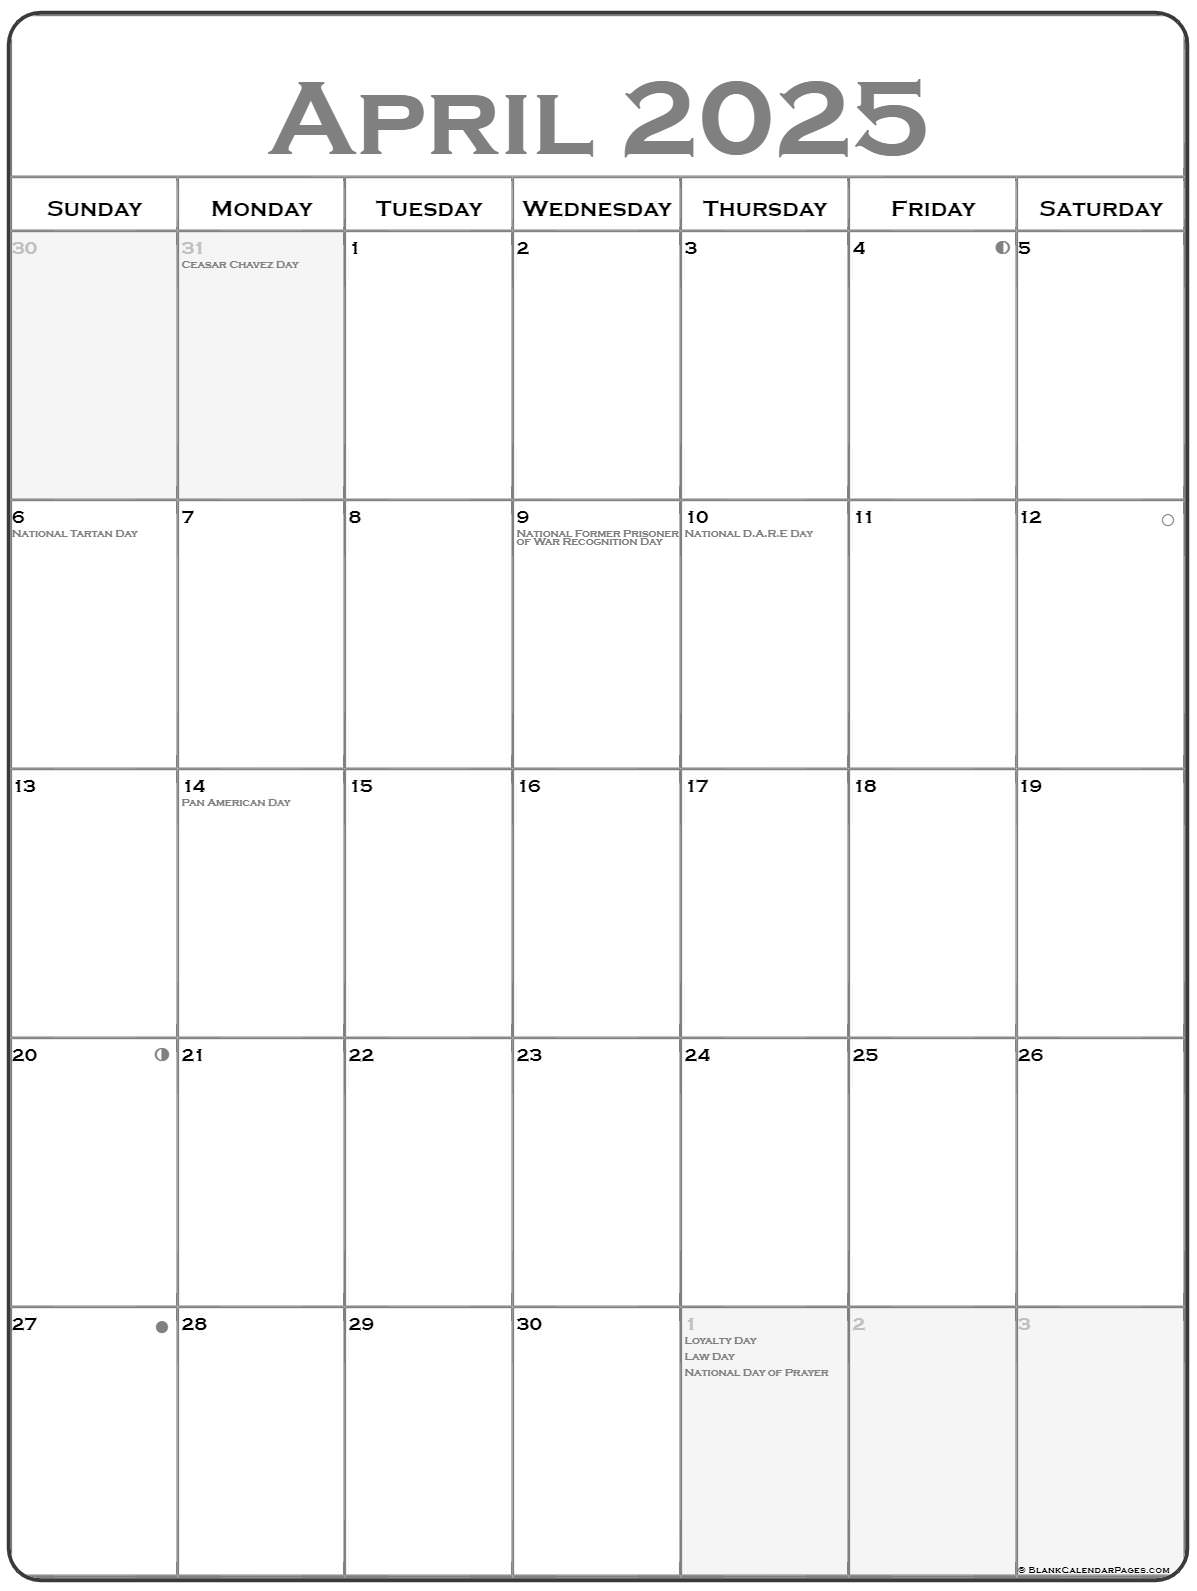 march-2025-calendar-free-blank-printable-with-holidays